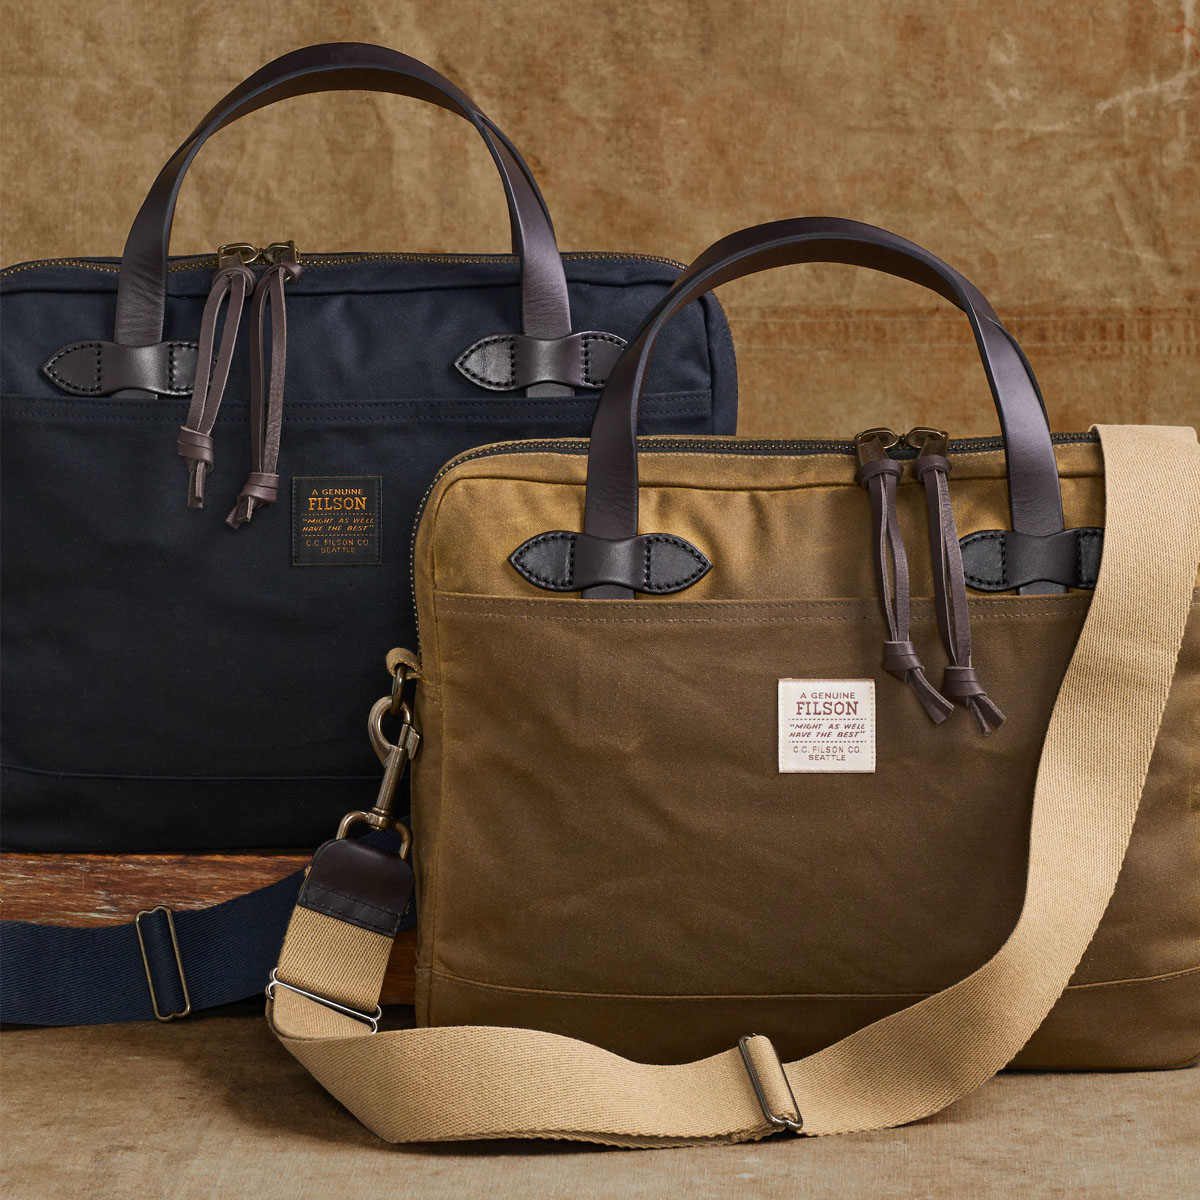 Filson Tin Cloth Compact Briefcase Navy, a streamlined briefcase made with heritage materials and modern design